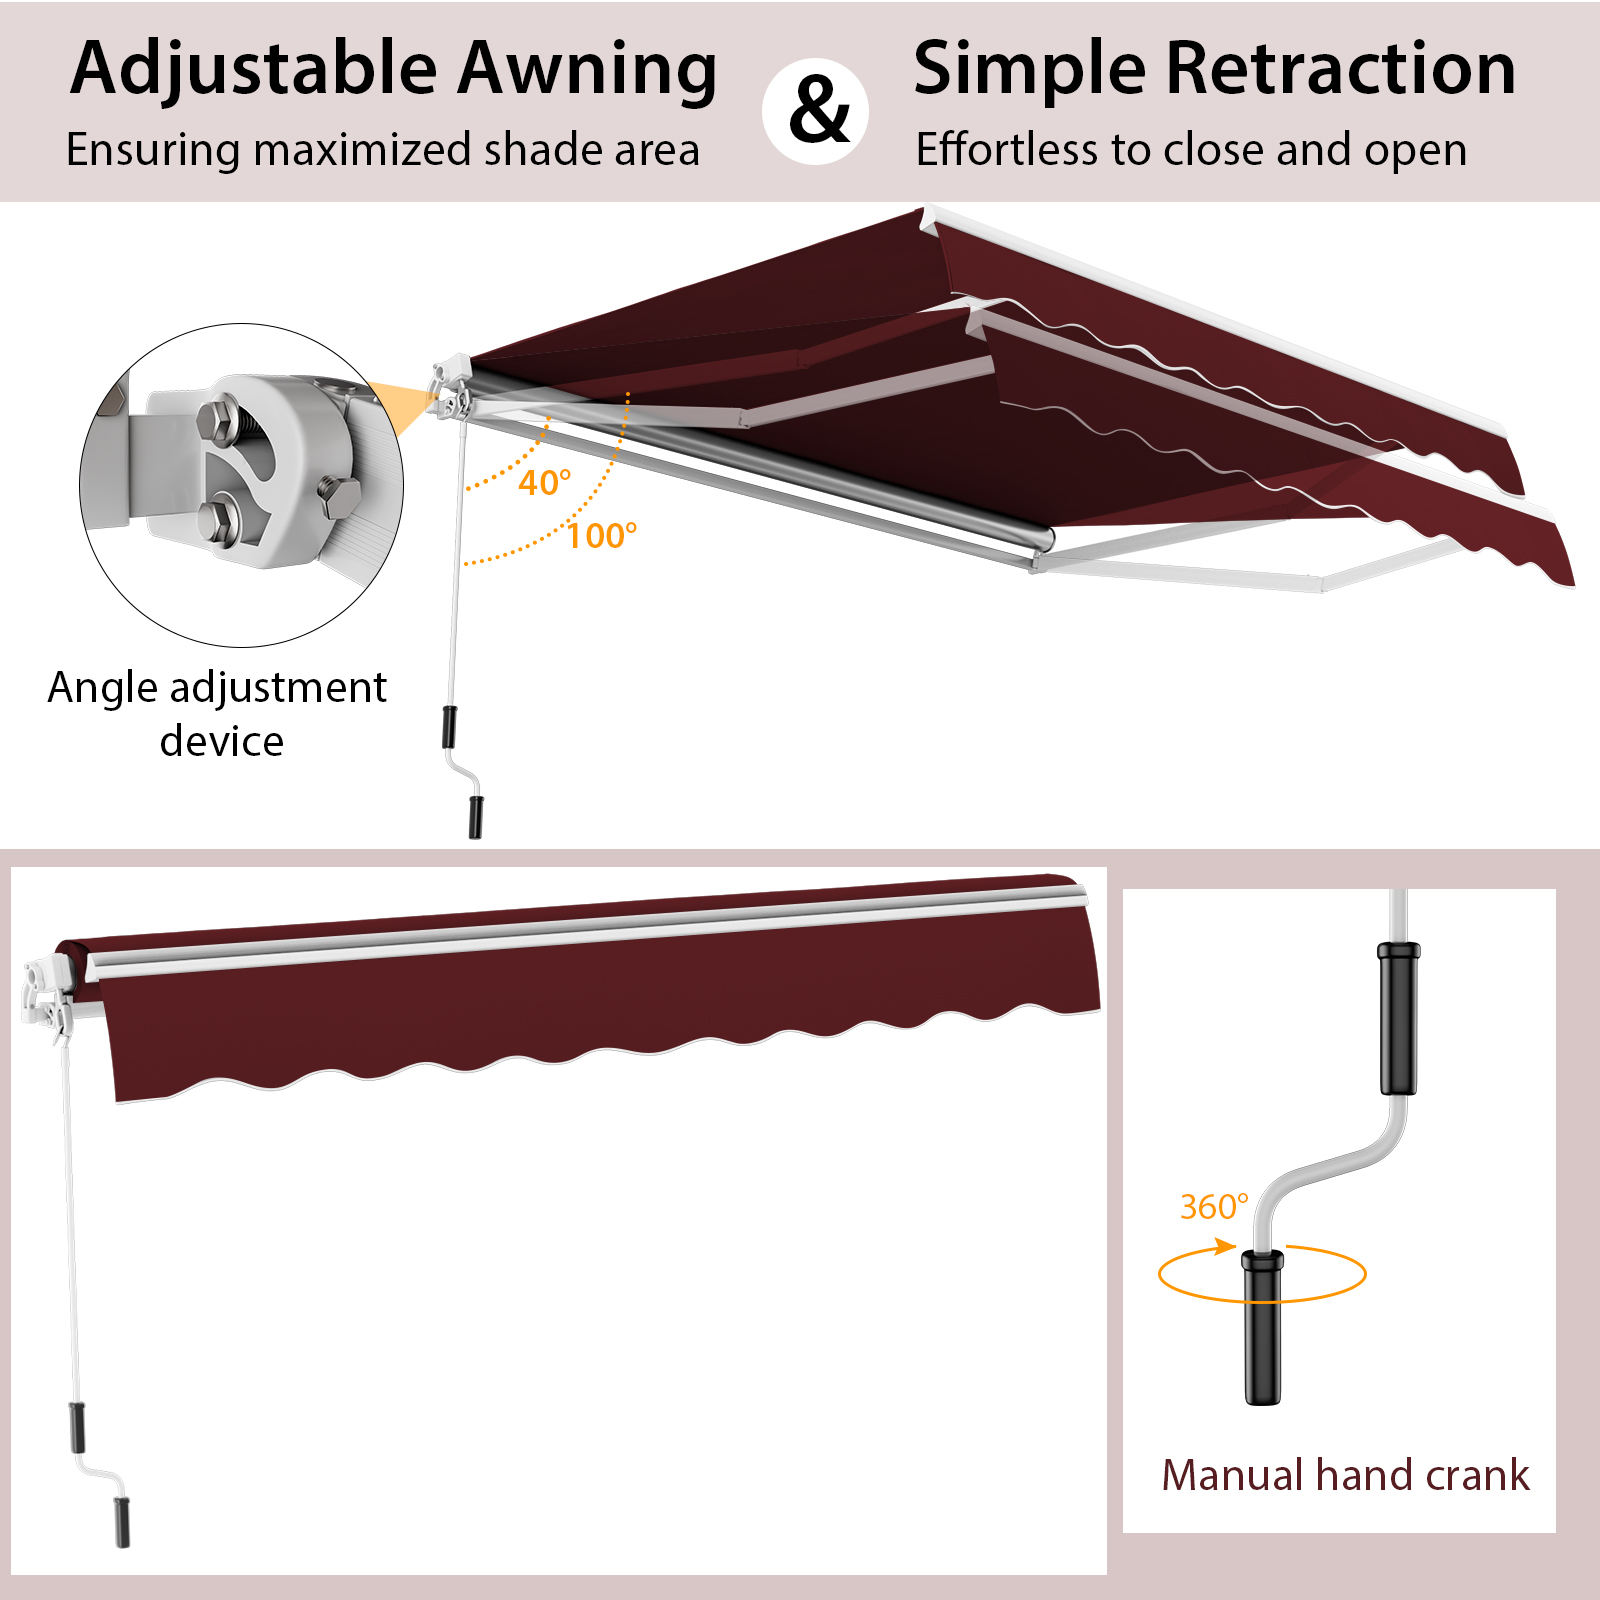 Patio_Retractable_Awning_with_Manual_Crank_Handle_Wine-8.jpg